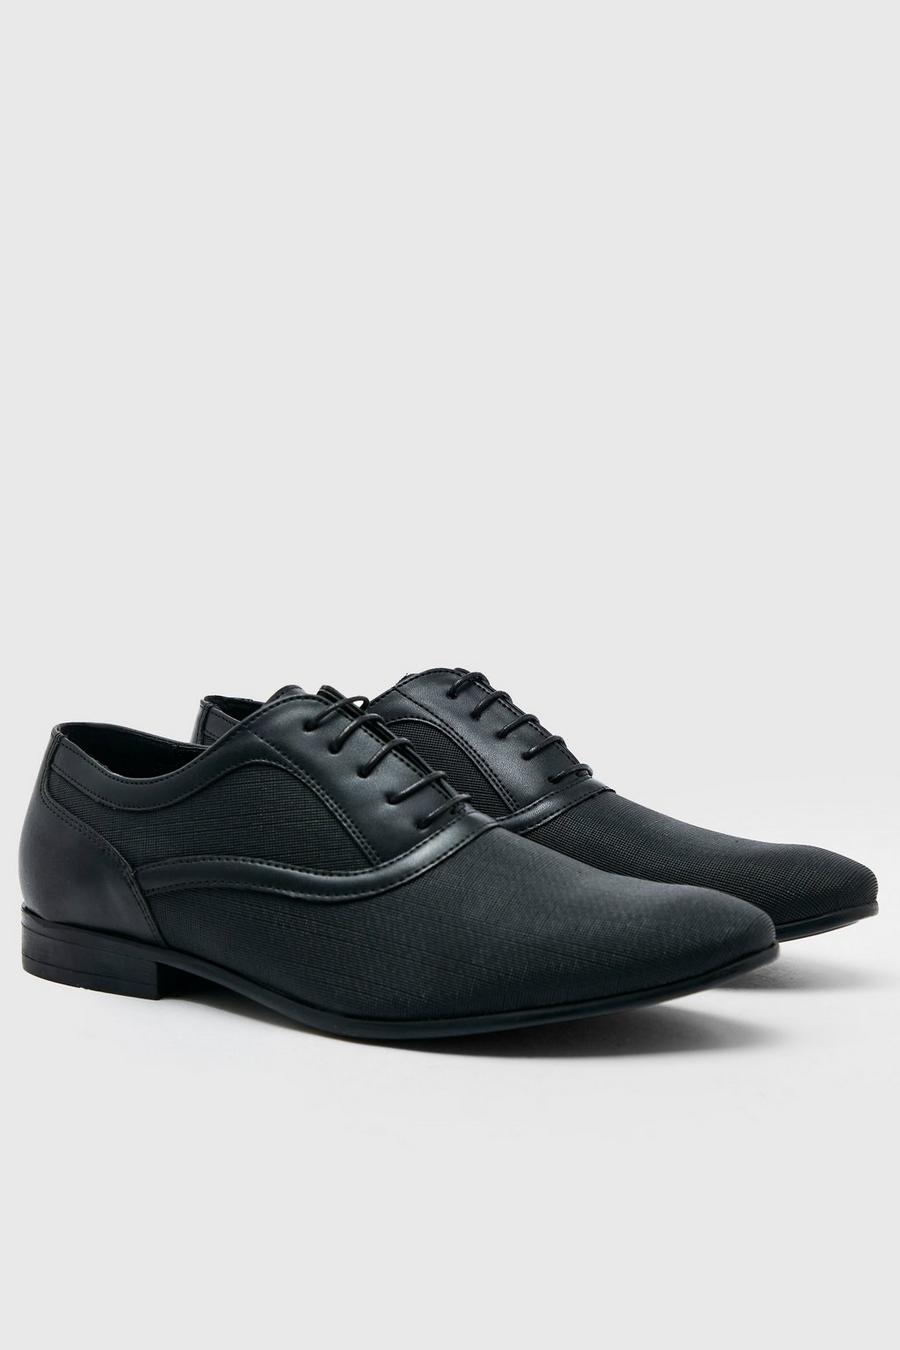 Black Embossed Faux Leather Oxford